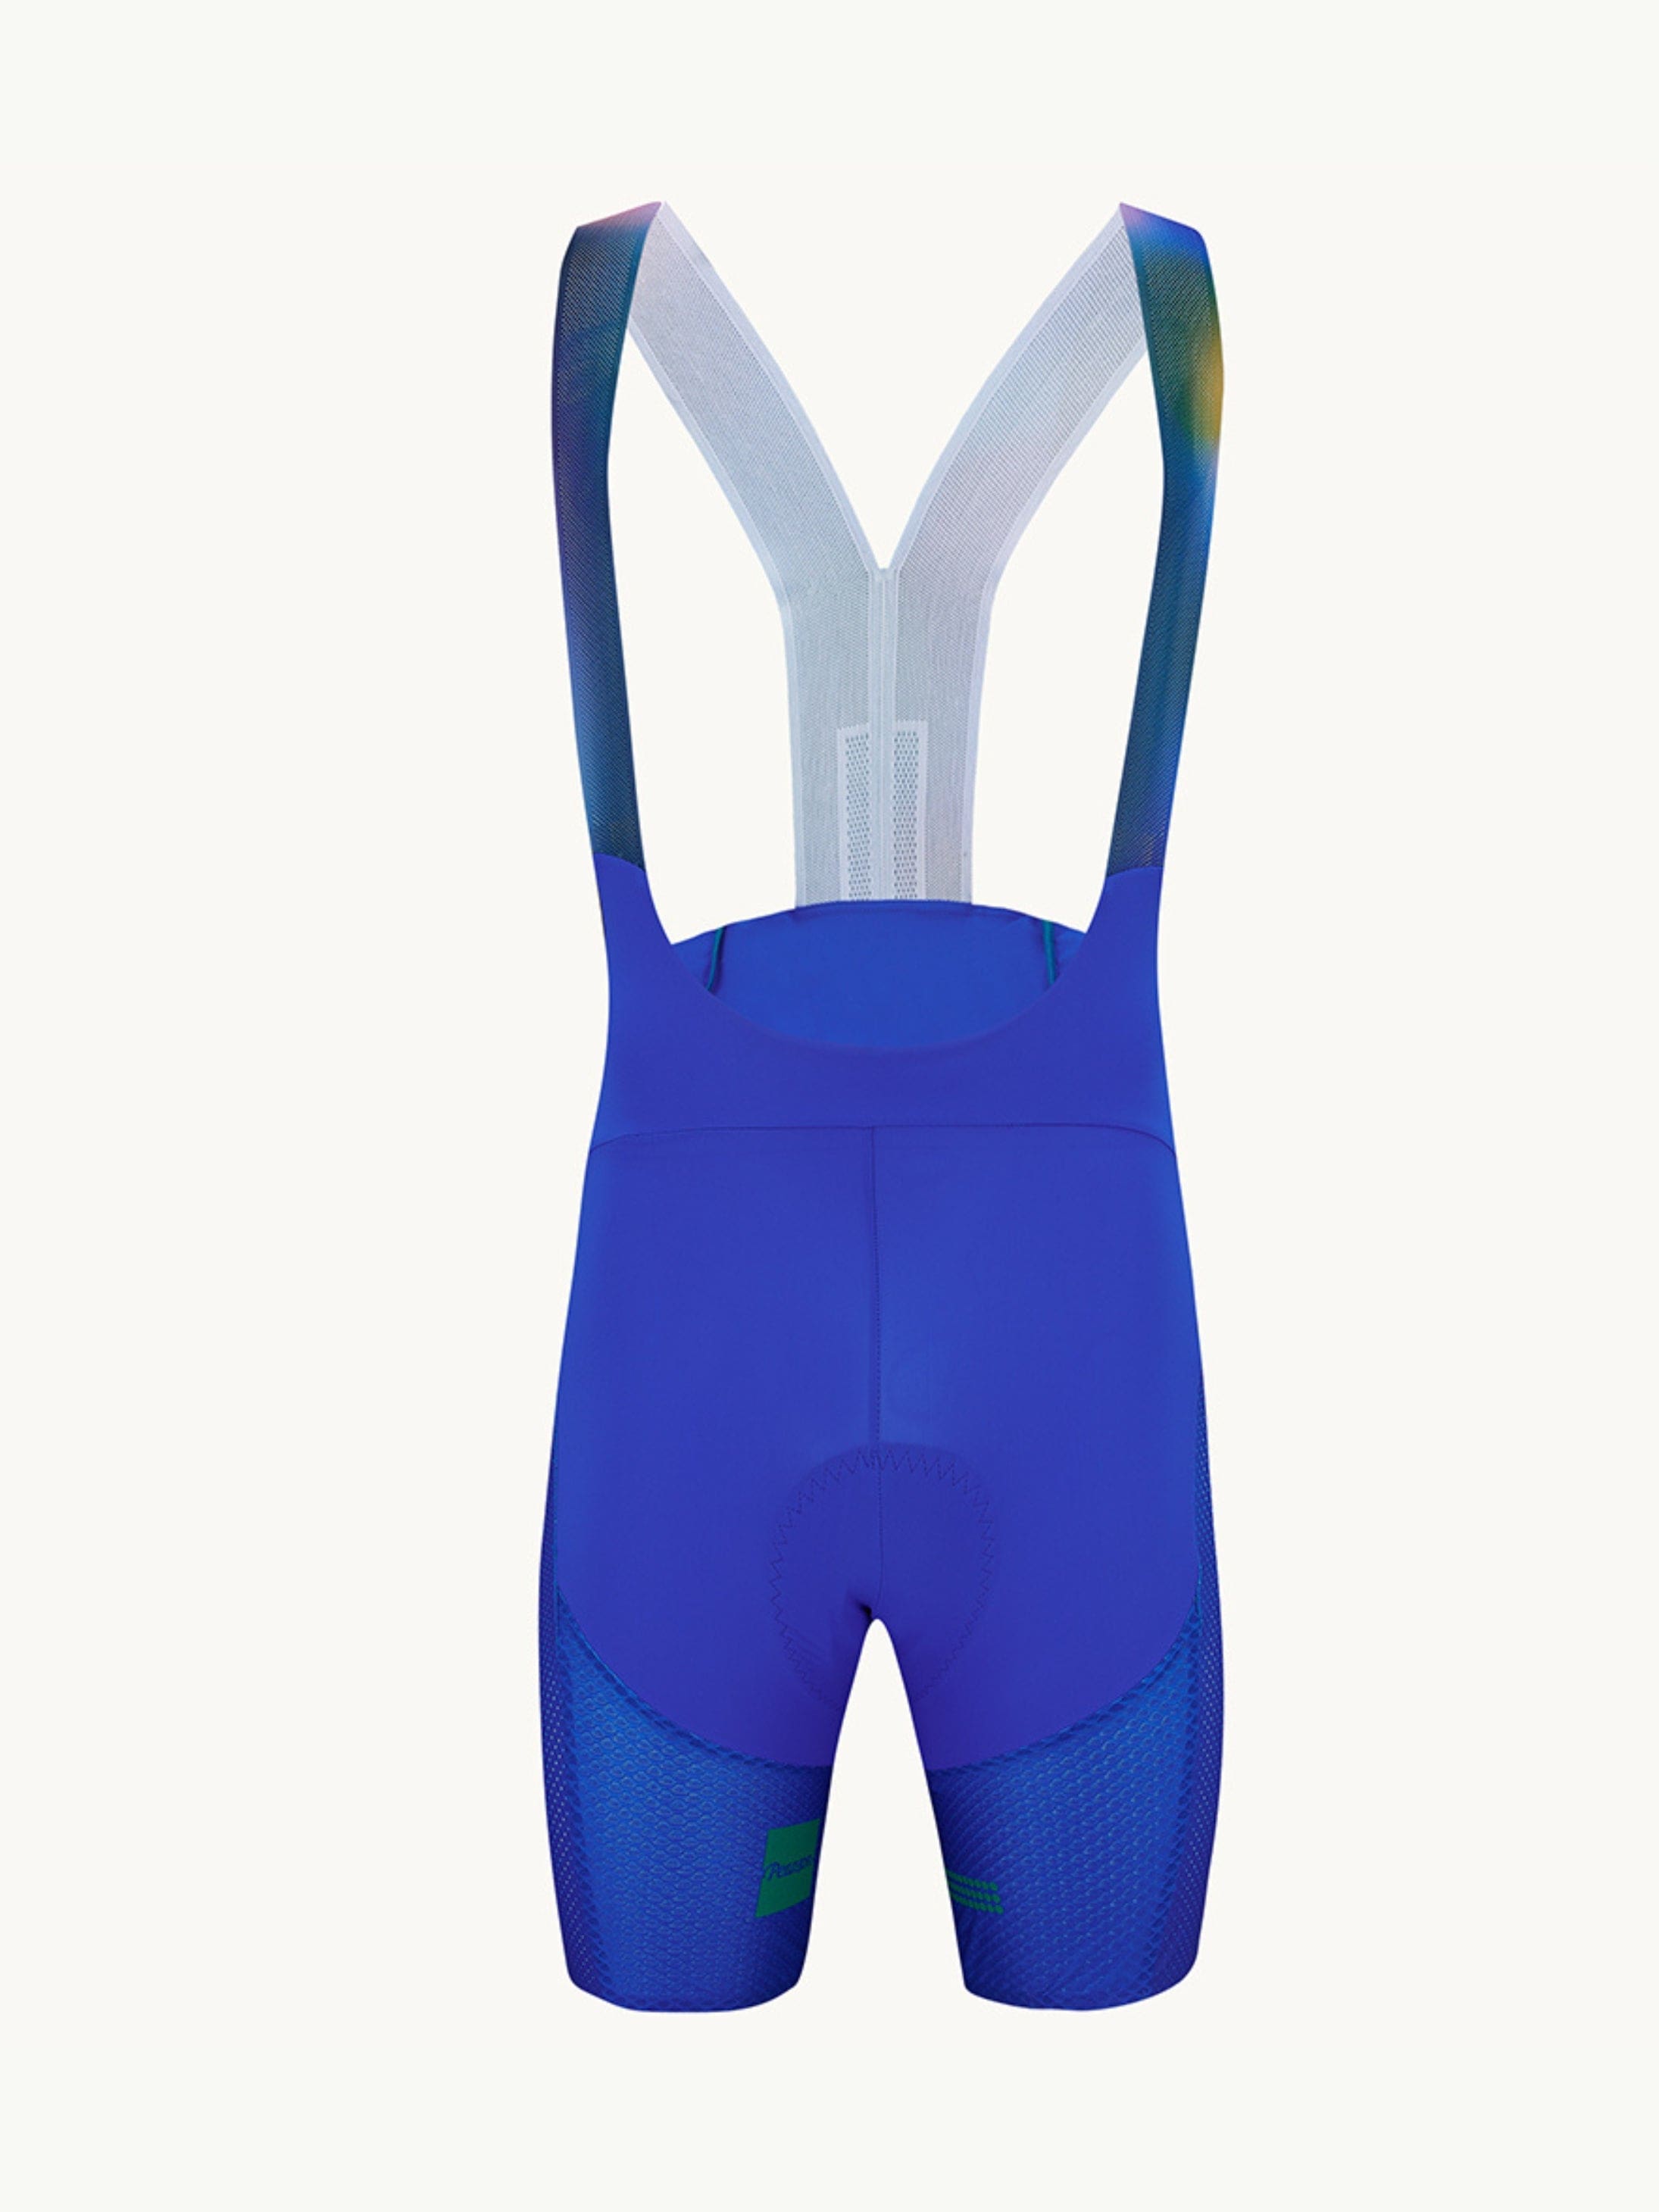 Pearson Cycles Pearson1860, Cut to the Quick - Men's Race Day Bib short, S / Cobalt Blue